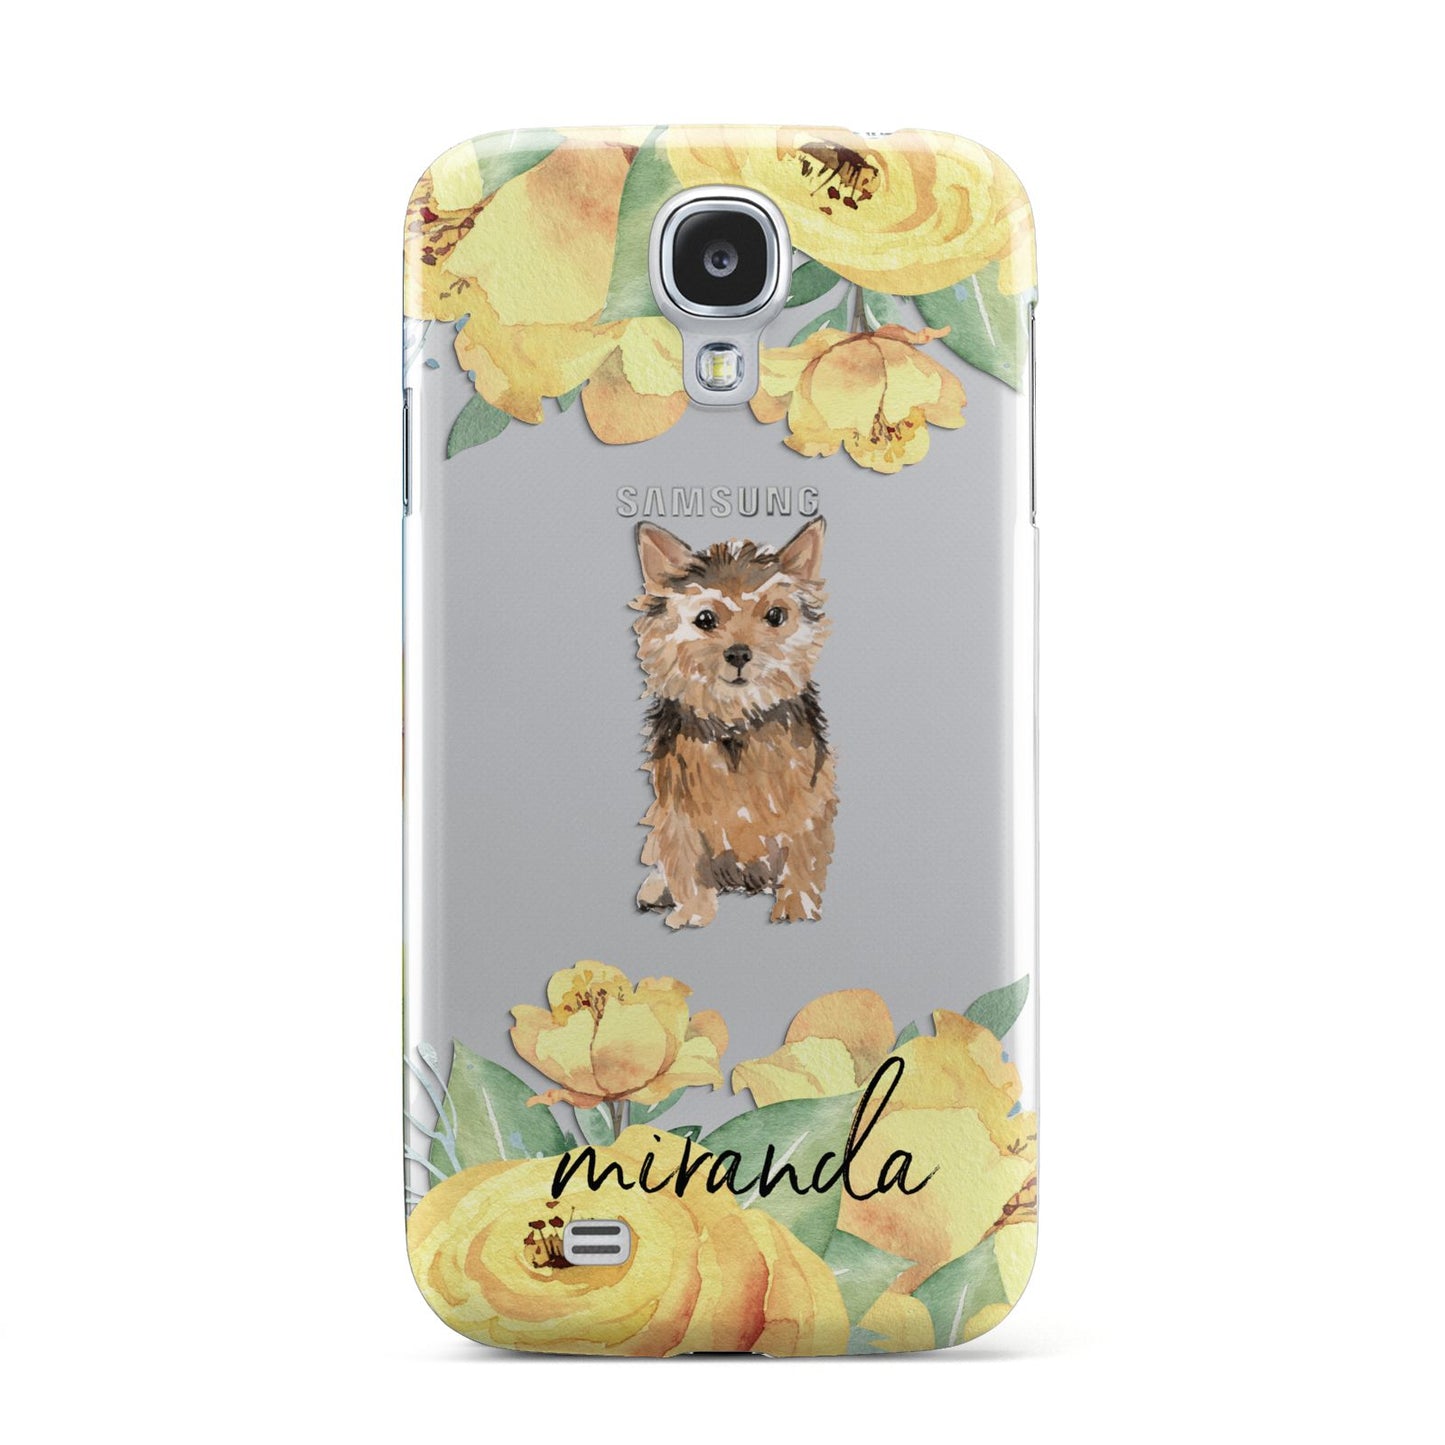 Personalised Norwich Terrier Samsung Galaxy S4 Case